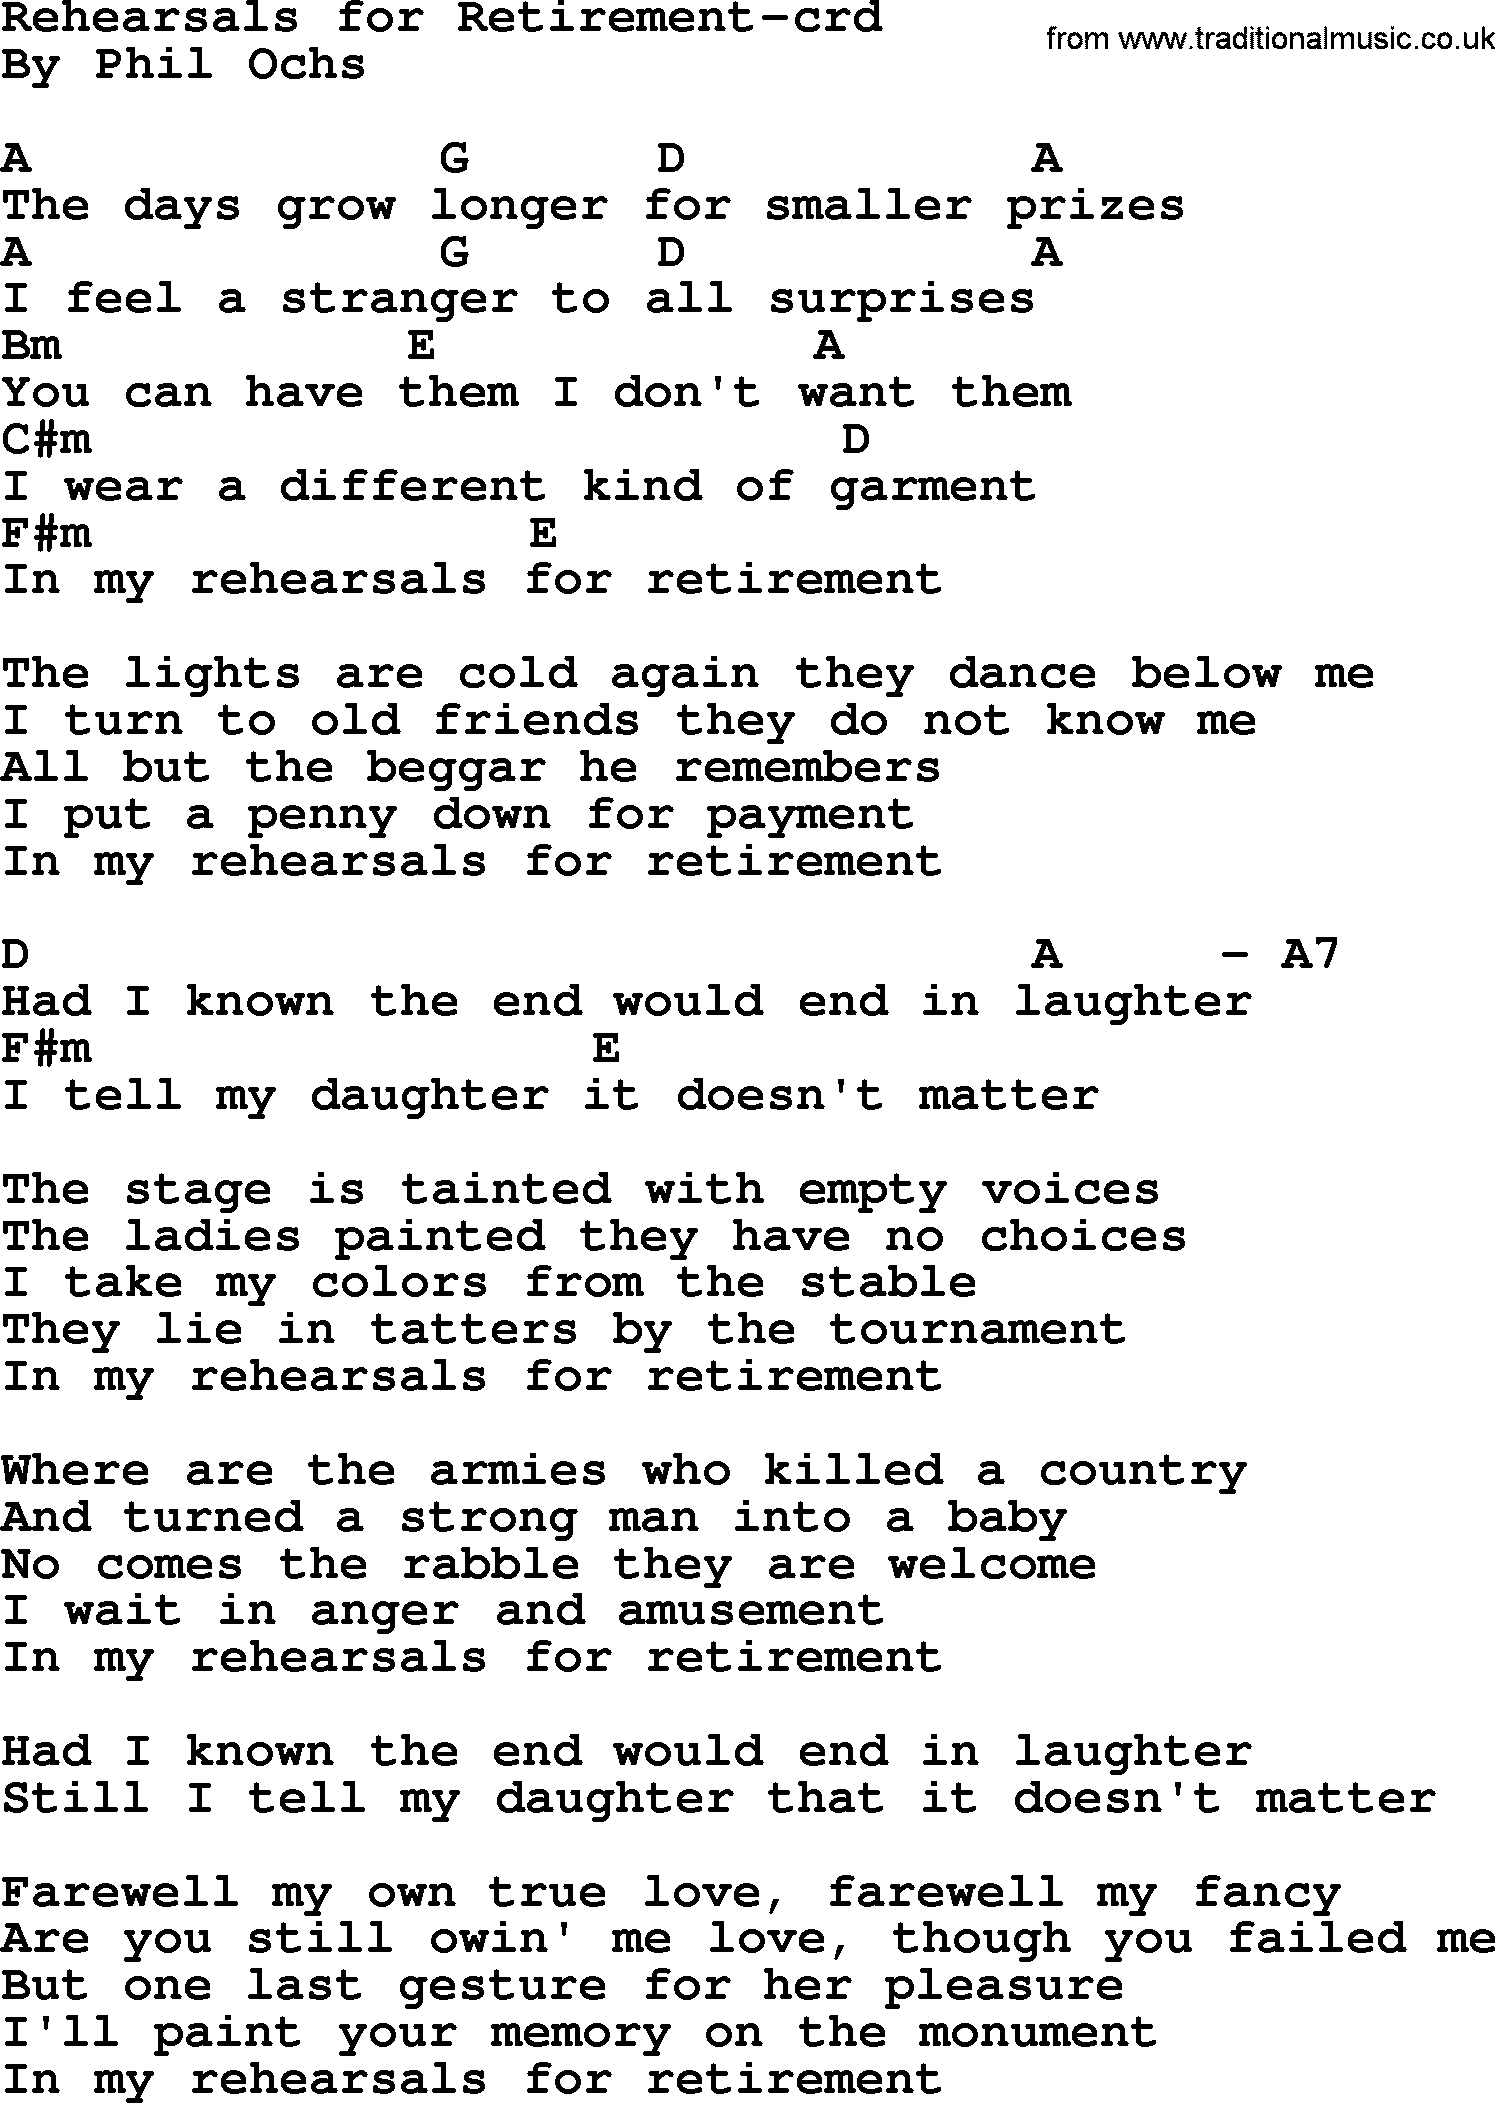 Phil Ochs song Rehearsals For Retirement- by Phil Ochs, lyrics and chords